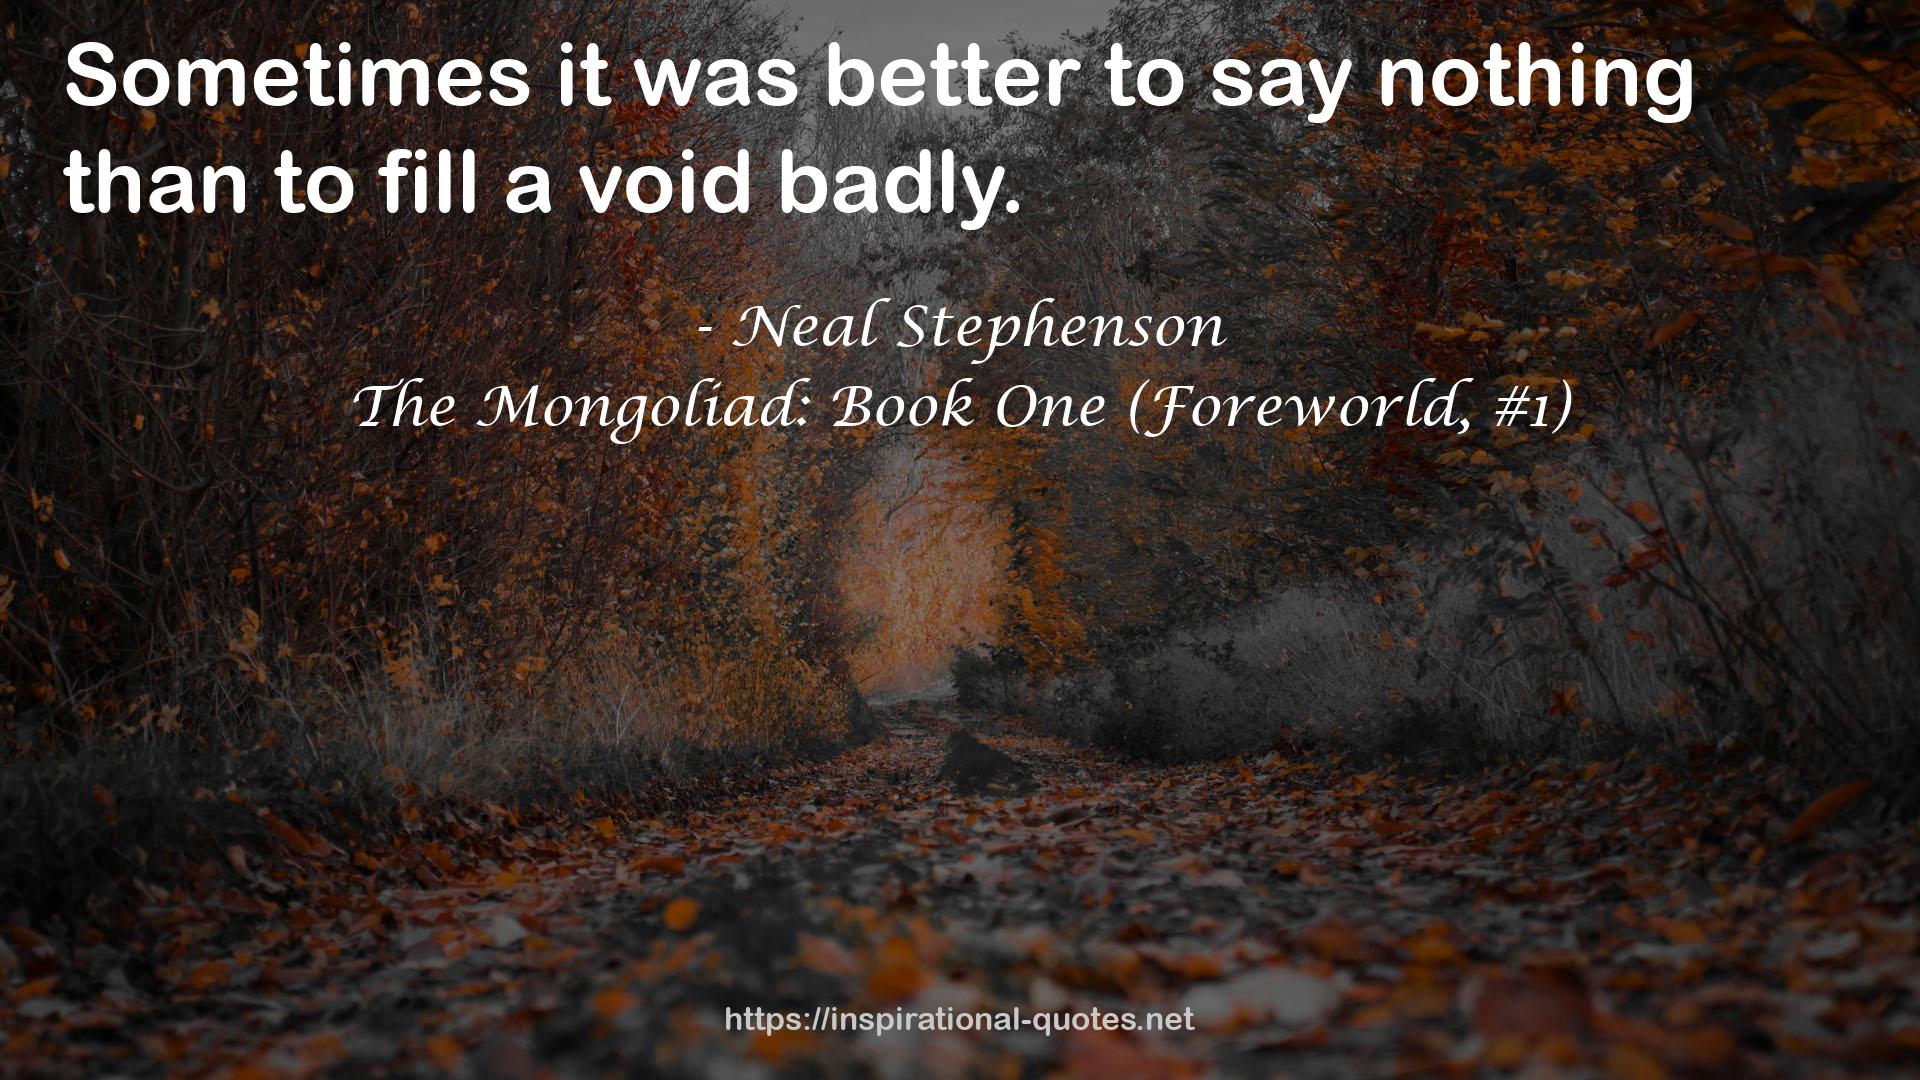 The Mongoliad: Book One (Foreworld, #1) QUOTES